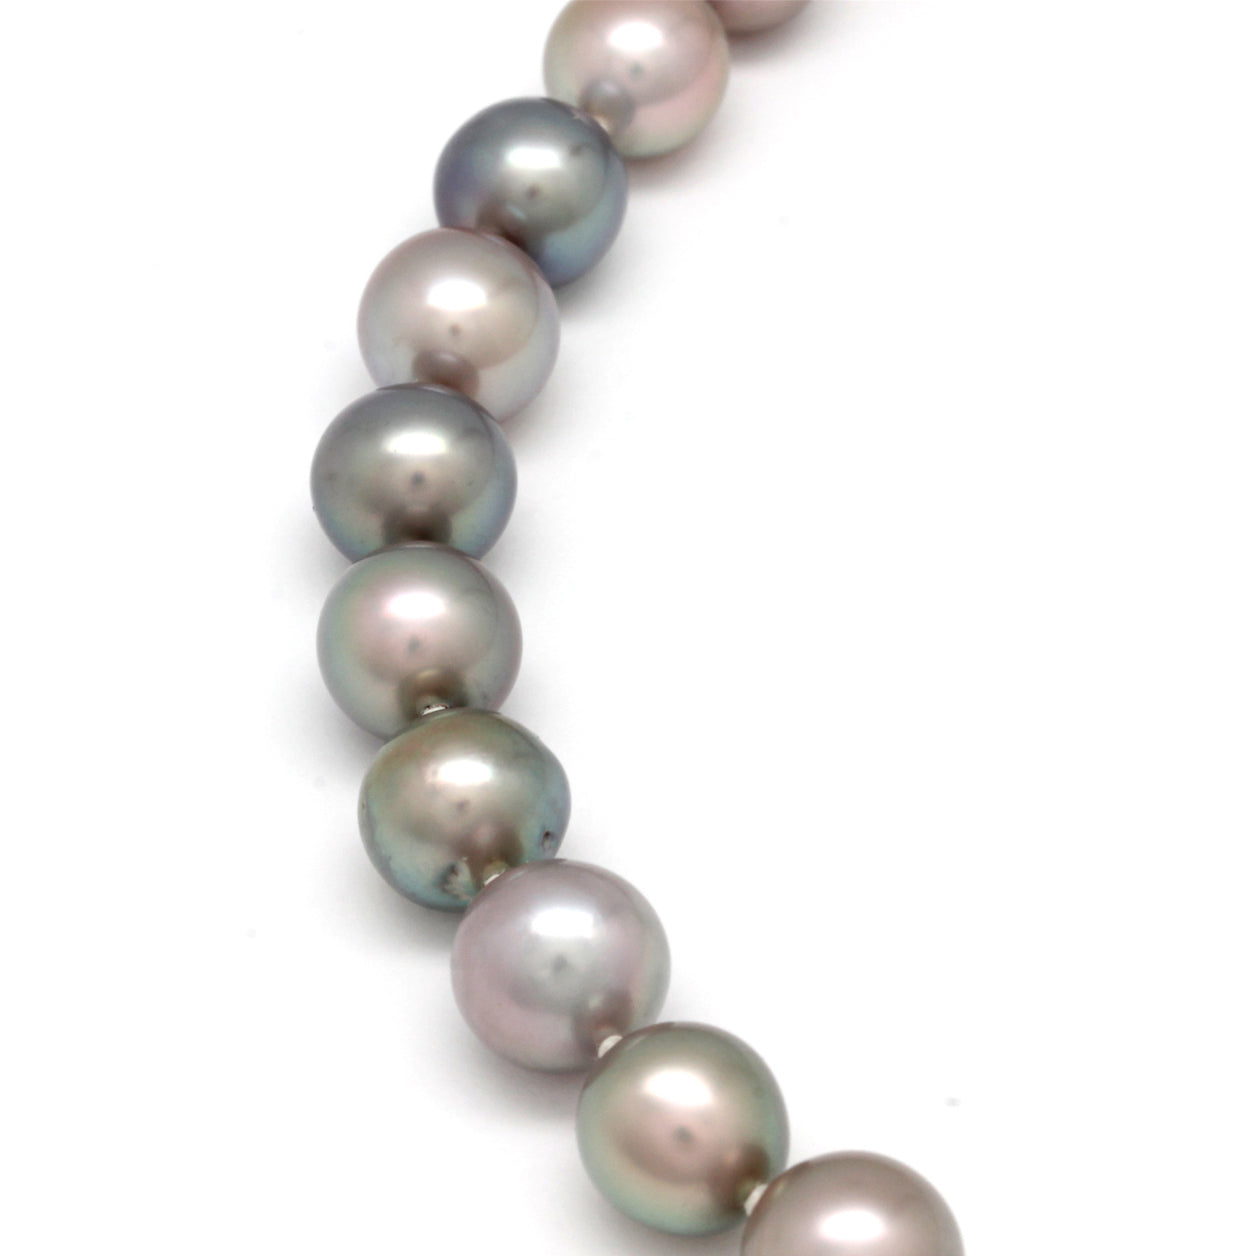 Gorgeous Iridescent Sea of Cortez Pearl Necklace